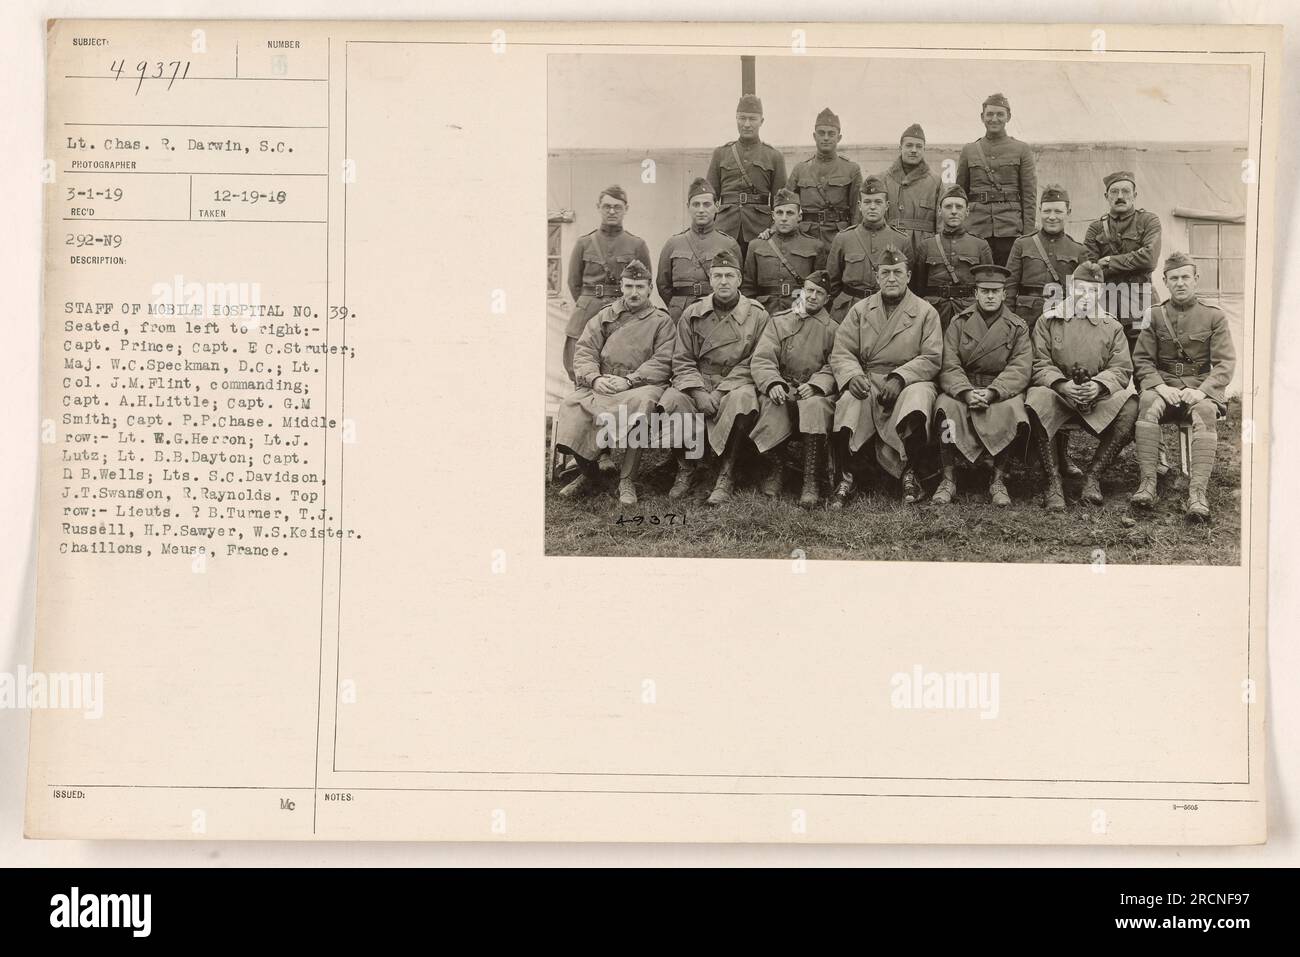 Seated in the photograph are Capt. Prince, Capt. E.C. Struter, Maj. W.C. Speckman, D.C., Lt. Col. J.M. Flint, Capt. A.H. Little, Capt. G.M. Smith, and Capt. P.P. Chase. In the middle row are Lt. W.H. Herron, Lt. J. Lutz, Lt. B.B. Dayton, Capt. D.B. Wells, Lts. S.C. Davidson, J.T. Swanson, and R. Reynolds. Top row consists of Lieuts. R.B. Turner, T.J. Russell, H.P. Sawyer, and W.S. Keister. The location is Chaillons, Meuse, France. Note: The caption is a replication of the text provided by the user. However, some words and abbreviations were indistinguishable or incomplete, resulting in inconsi Stock Photo